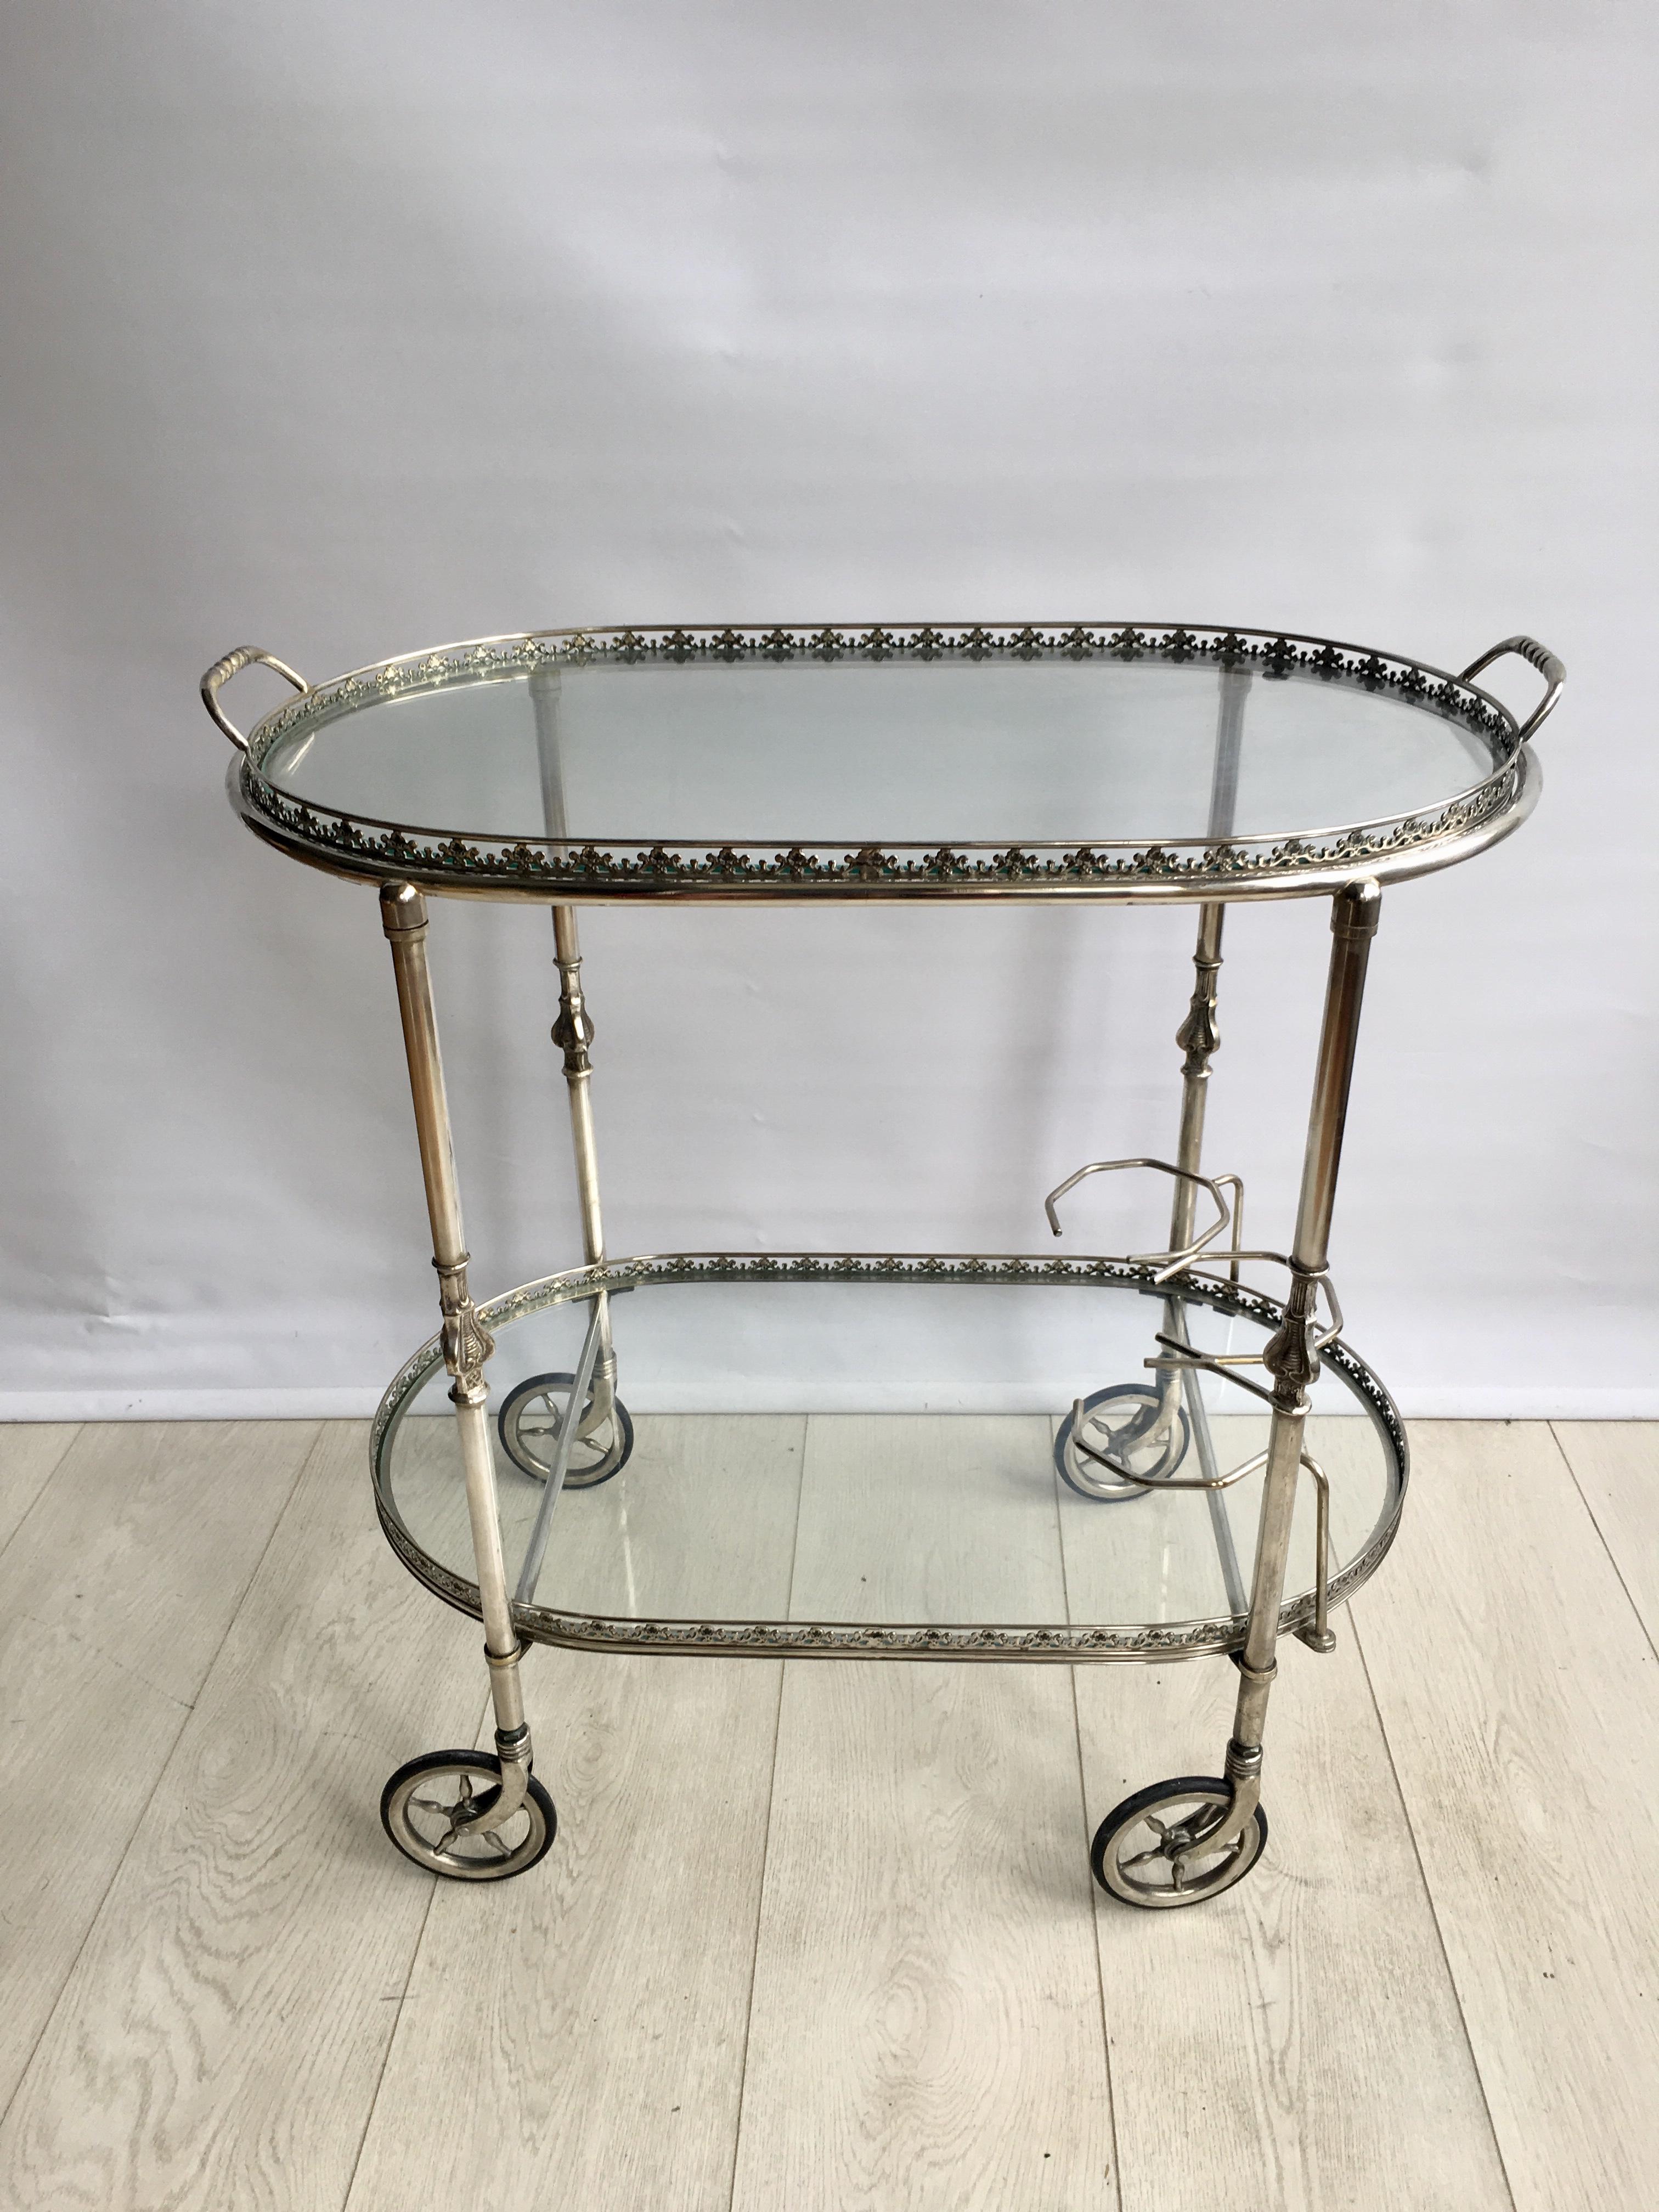 Vintage oval drinks trolley from France, circa 1950

Polished silver frame with decorative fretwork and a lift off top tray 

Top tray measures 63 cm wide (67 cm with handles), 37 cm deep and stands 64 cm to glass

Overall dims 67 cm wide,